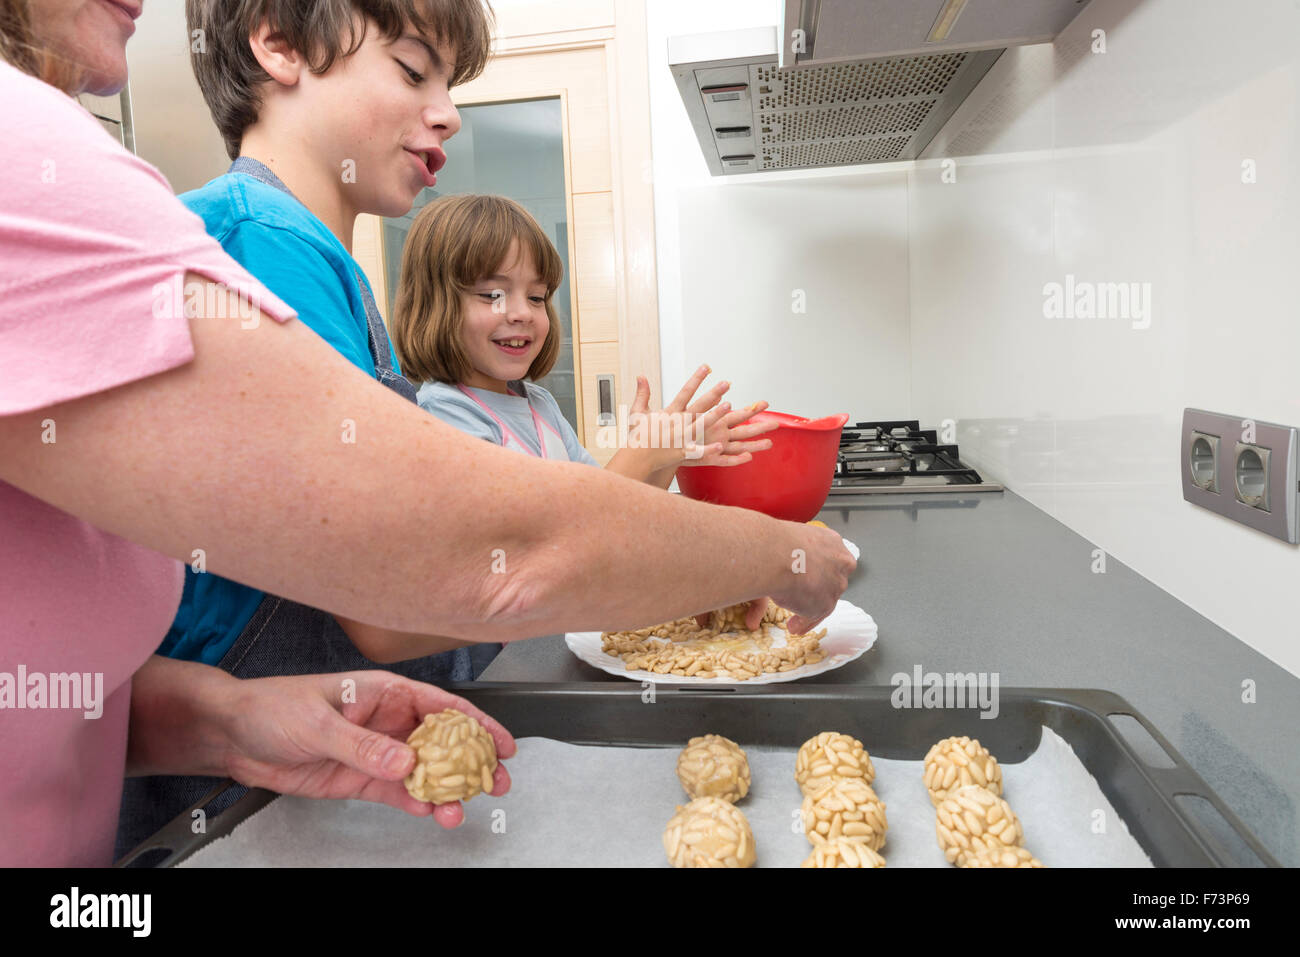 Family kneading marzipan for make panellets in the kitchen. Stock Photo